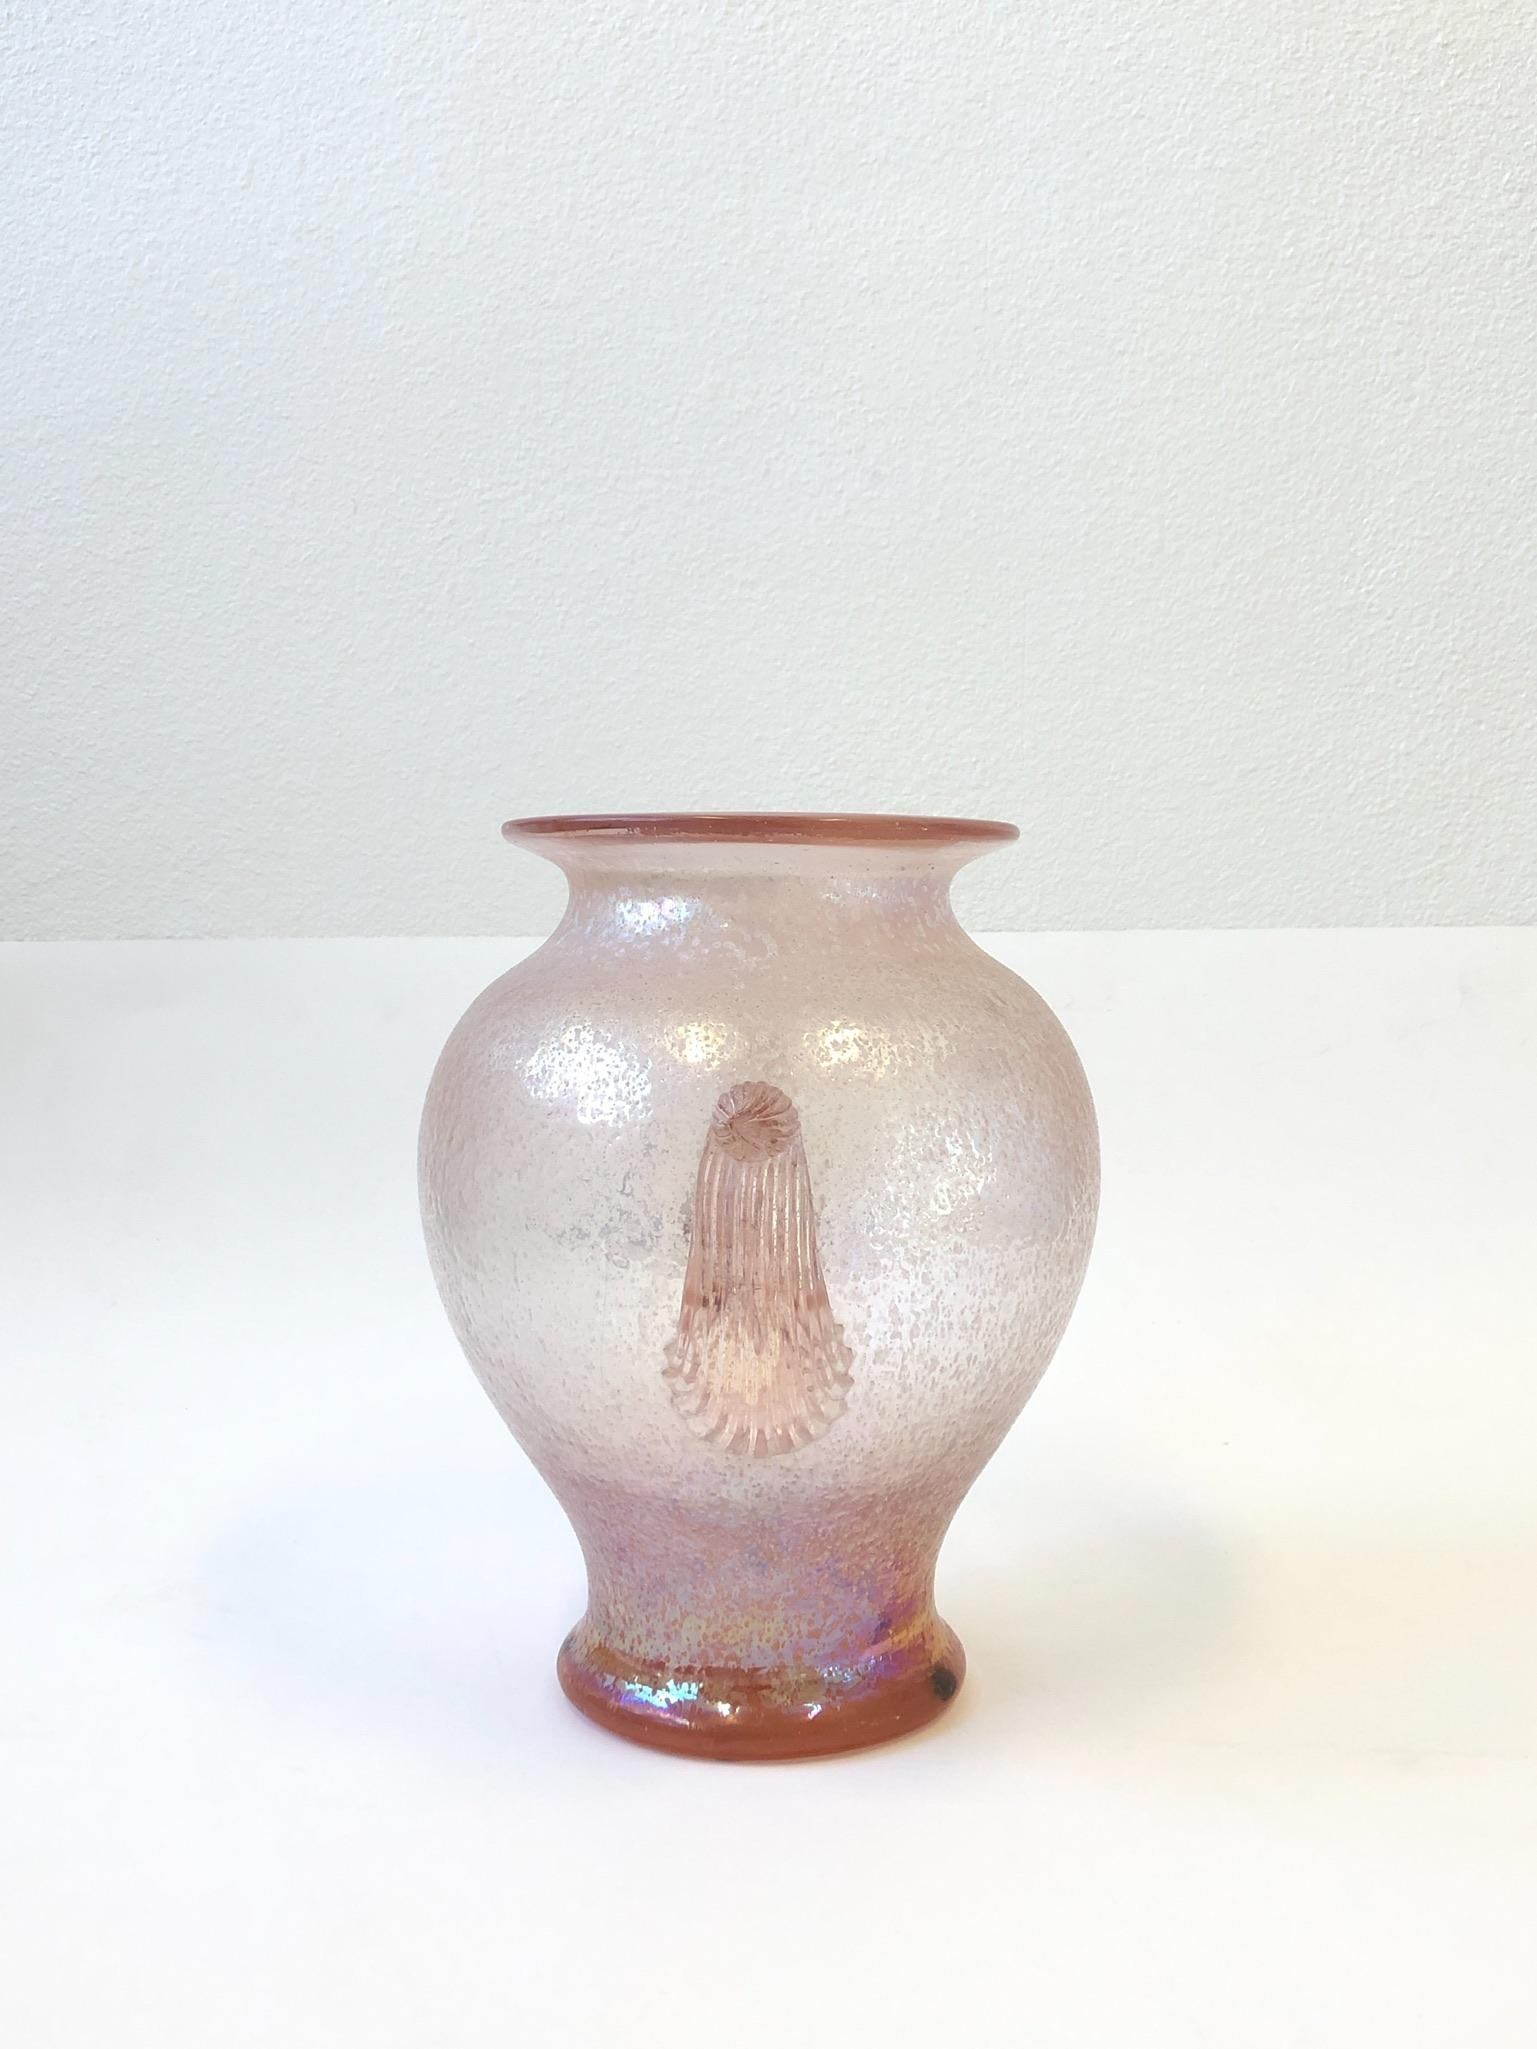 Large 1980s pink Italian scavo Murano glass vase by Seguso. Hand blown with a rough texture finish.
The vase retains the Seguso Vetri d’Arte label.
Measurements: 14” high, 14” wide and 11” deep.